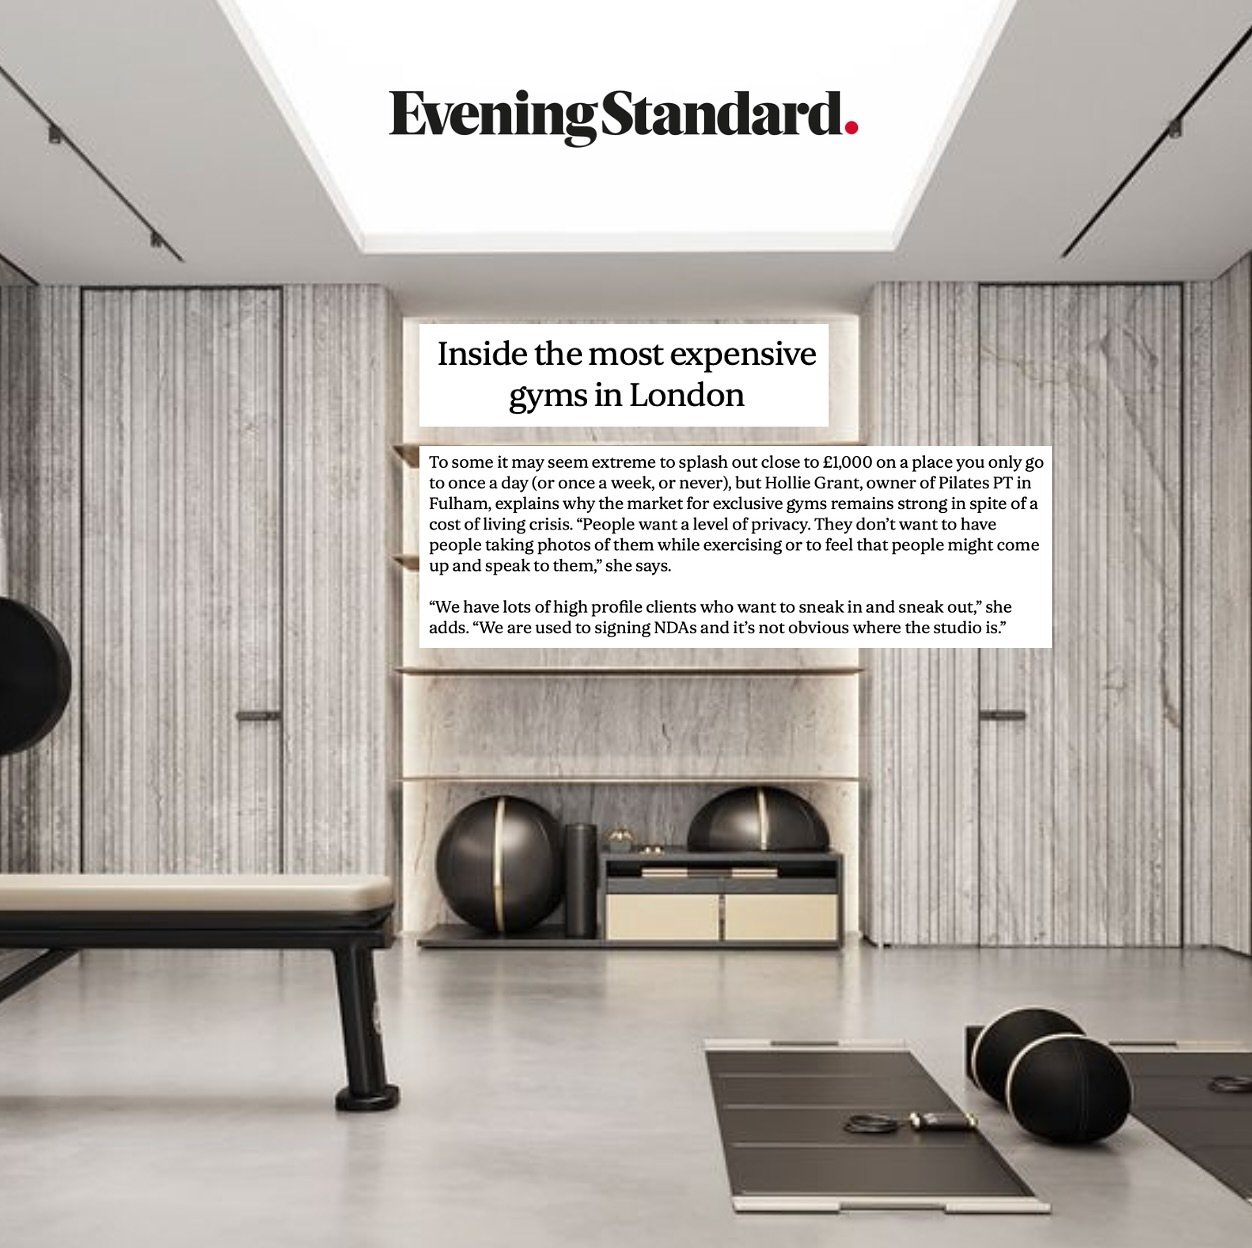 @thepilatespt spoke to @evening.standard about the most expensive gyms in London ✨ @alexpwrites